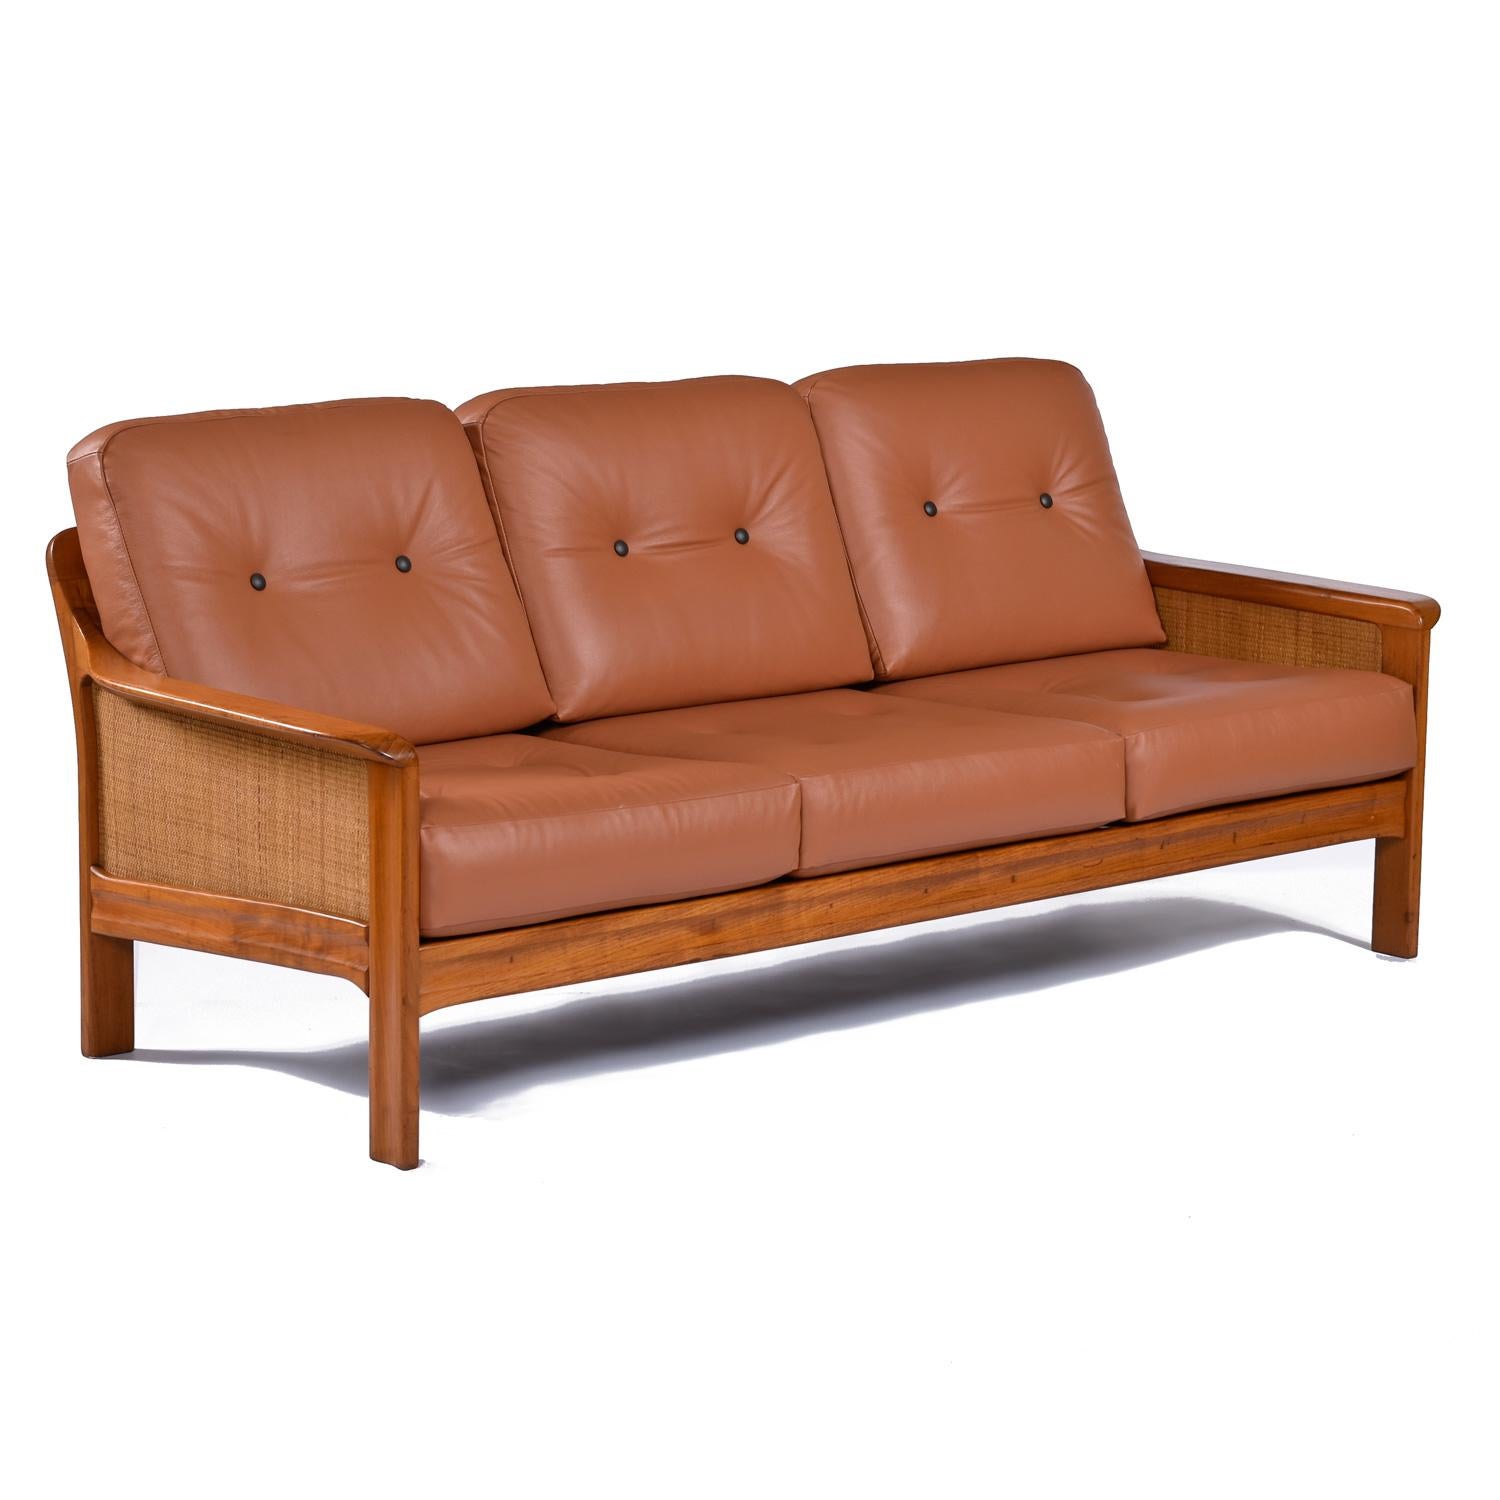 Sold as a 3-piece set.   All 3 pieces have been restored with new leather, but the chairs and sofa were upholstered in slightly different colored leather.  As you can see from the pics, the sofa is more of a reddish cognac.  The chairs are a